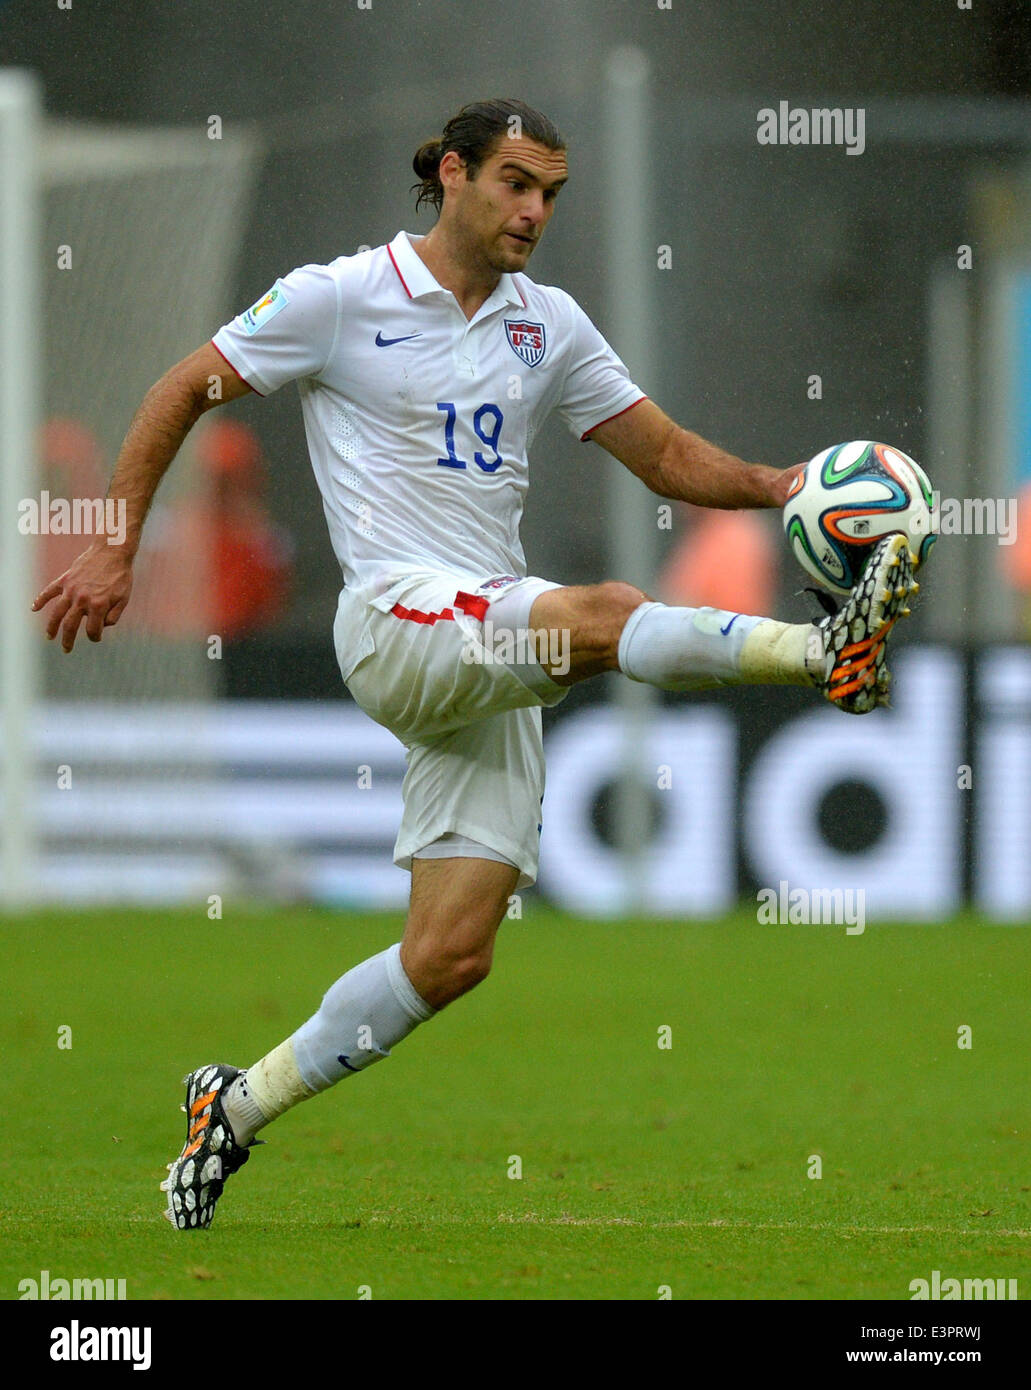 Usas Graham Zusi During The Fifa World Cup 2014 Group G Preliminary Round Match Between The Usa 